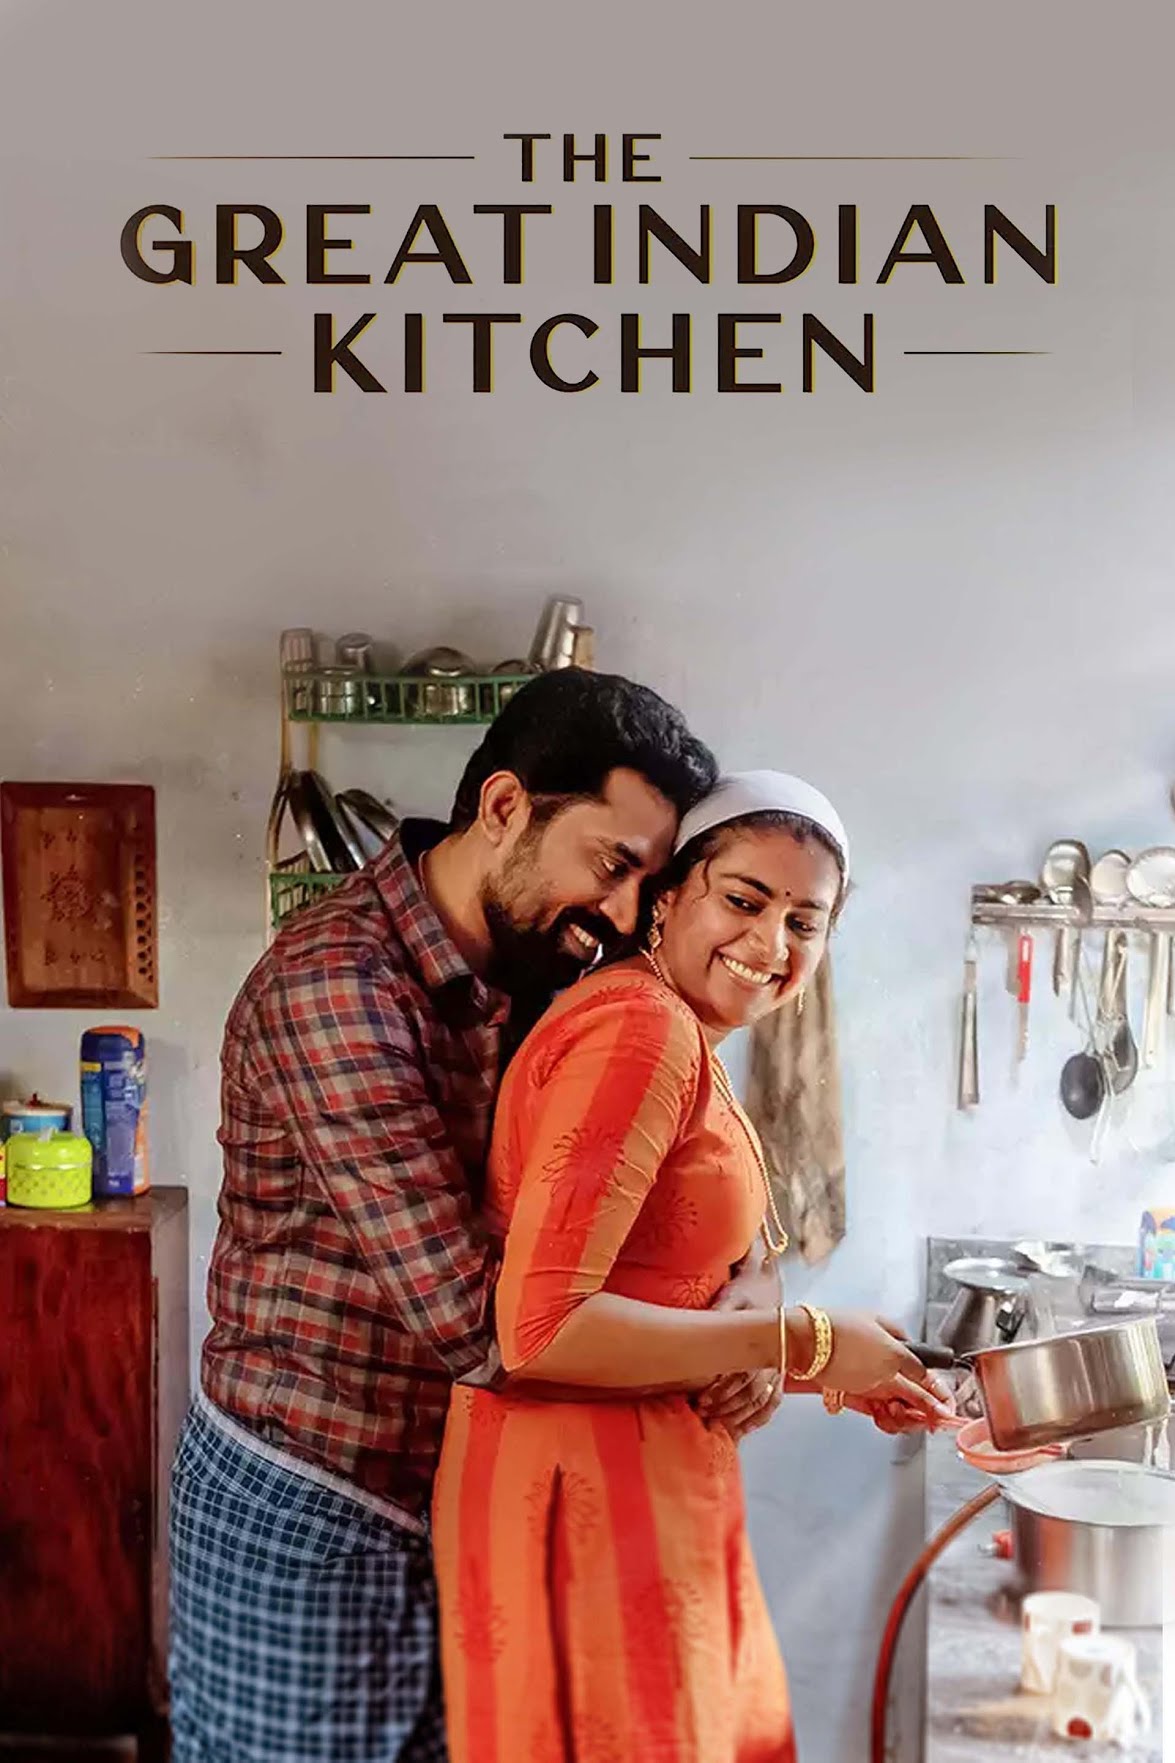 The Great Indian Kitchen 2021 HQ Hindi Dubbed 1080p HDRip 1.47GB Download